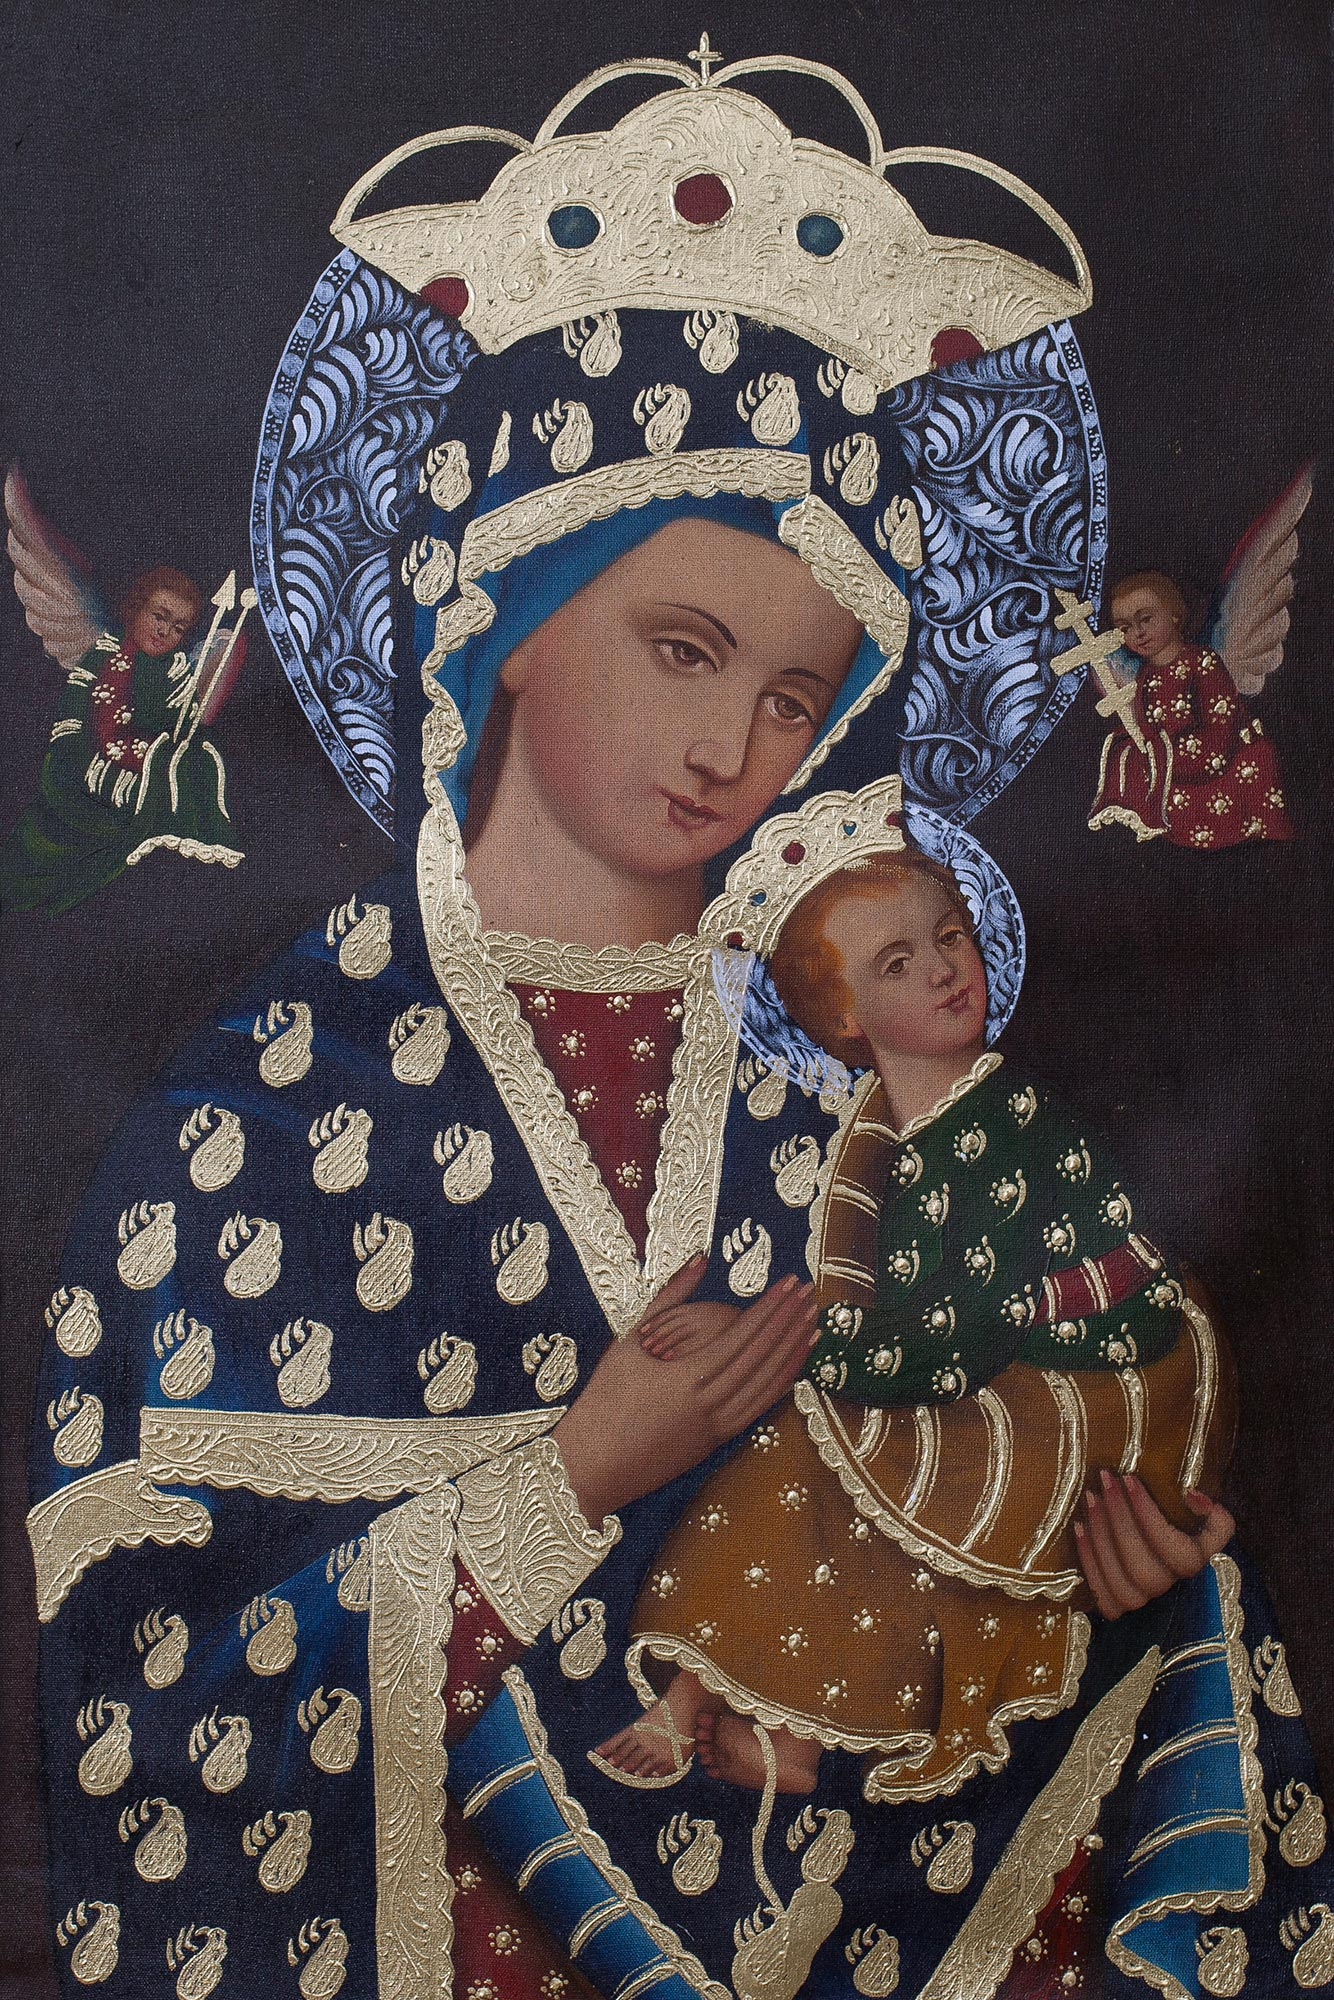 painting of our lady of perpetual help - OFF-70% > Shipping free